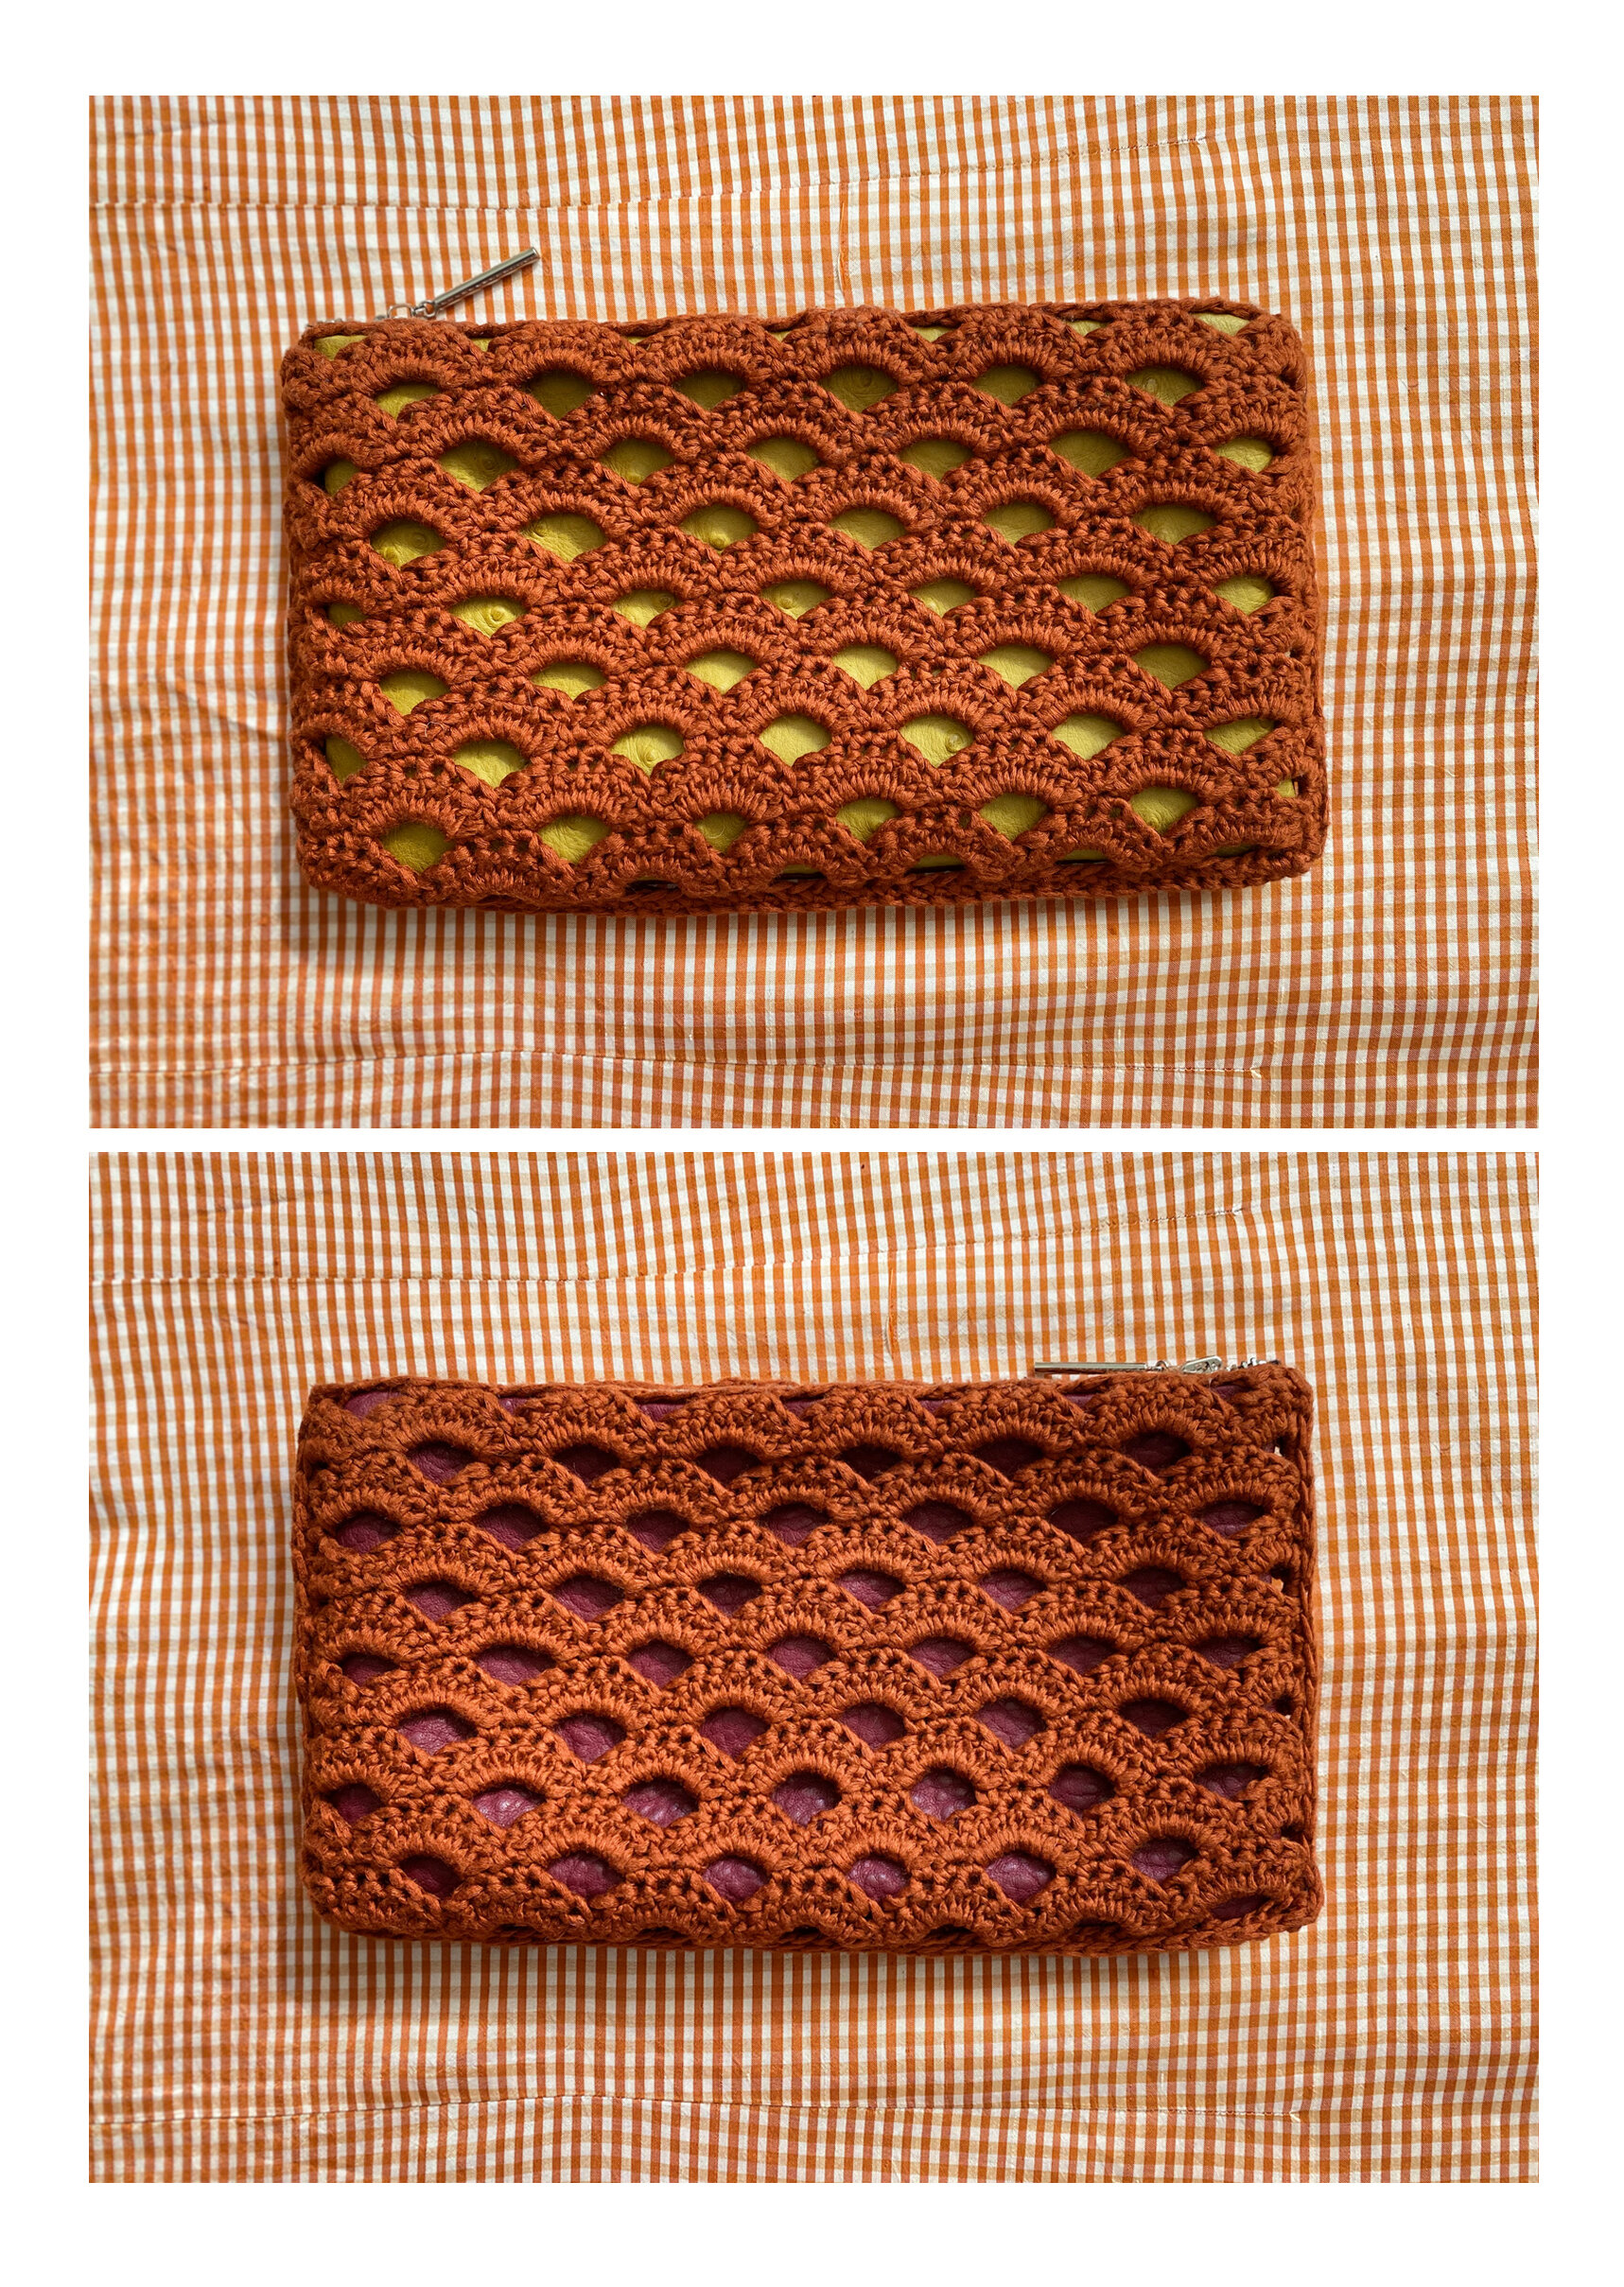  Arcade stitch crochet and deadstock leather pouch  